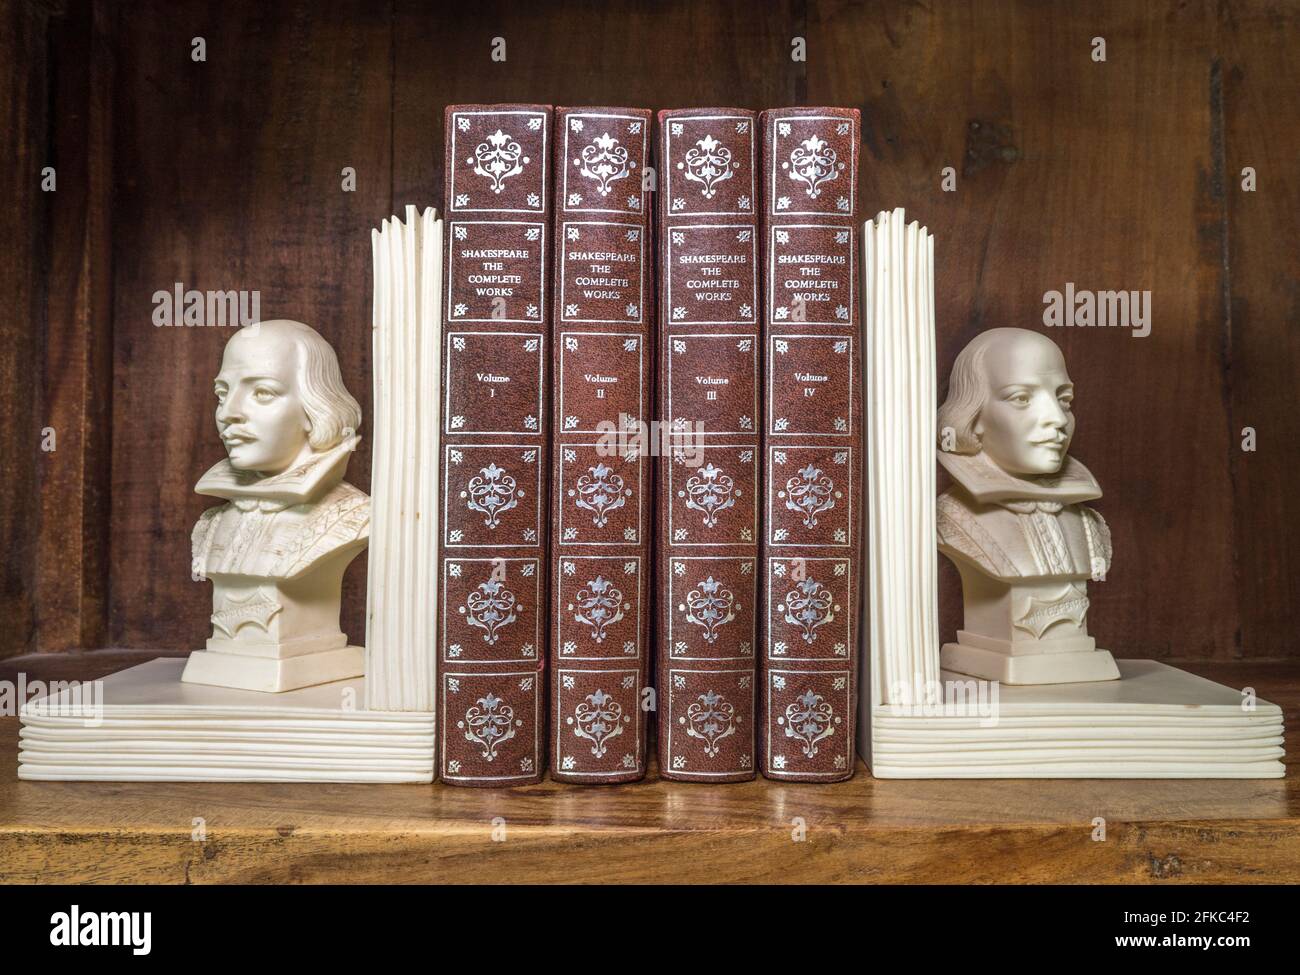 The Complete Works of Shakespeare books, between two William Shakespeare bust ornament bookends, on a shelf in a traditional old wooden bookcase. Stock Photo